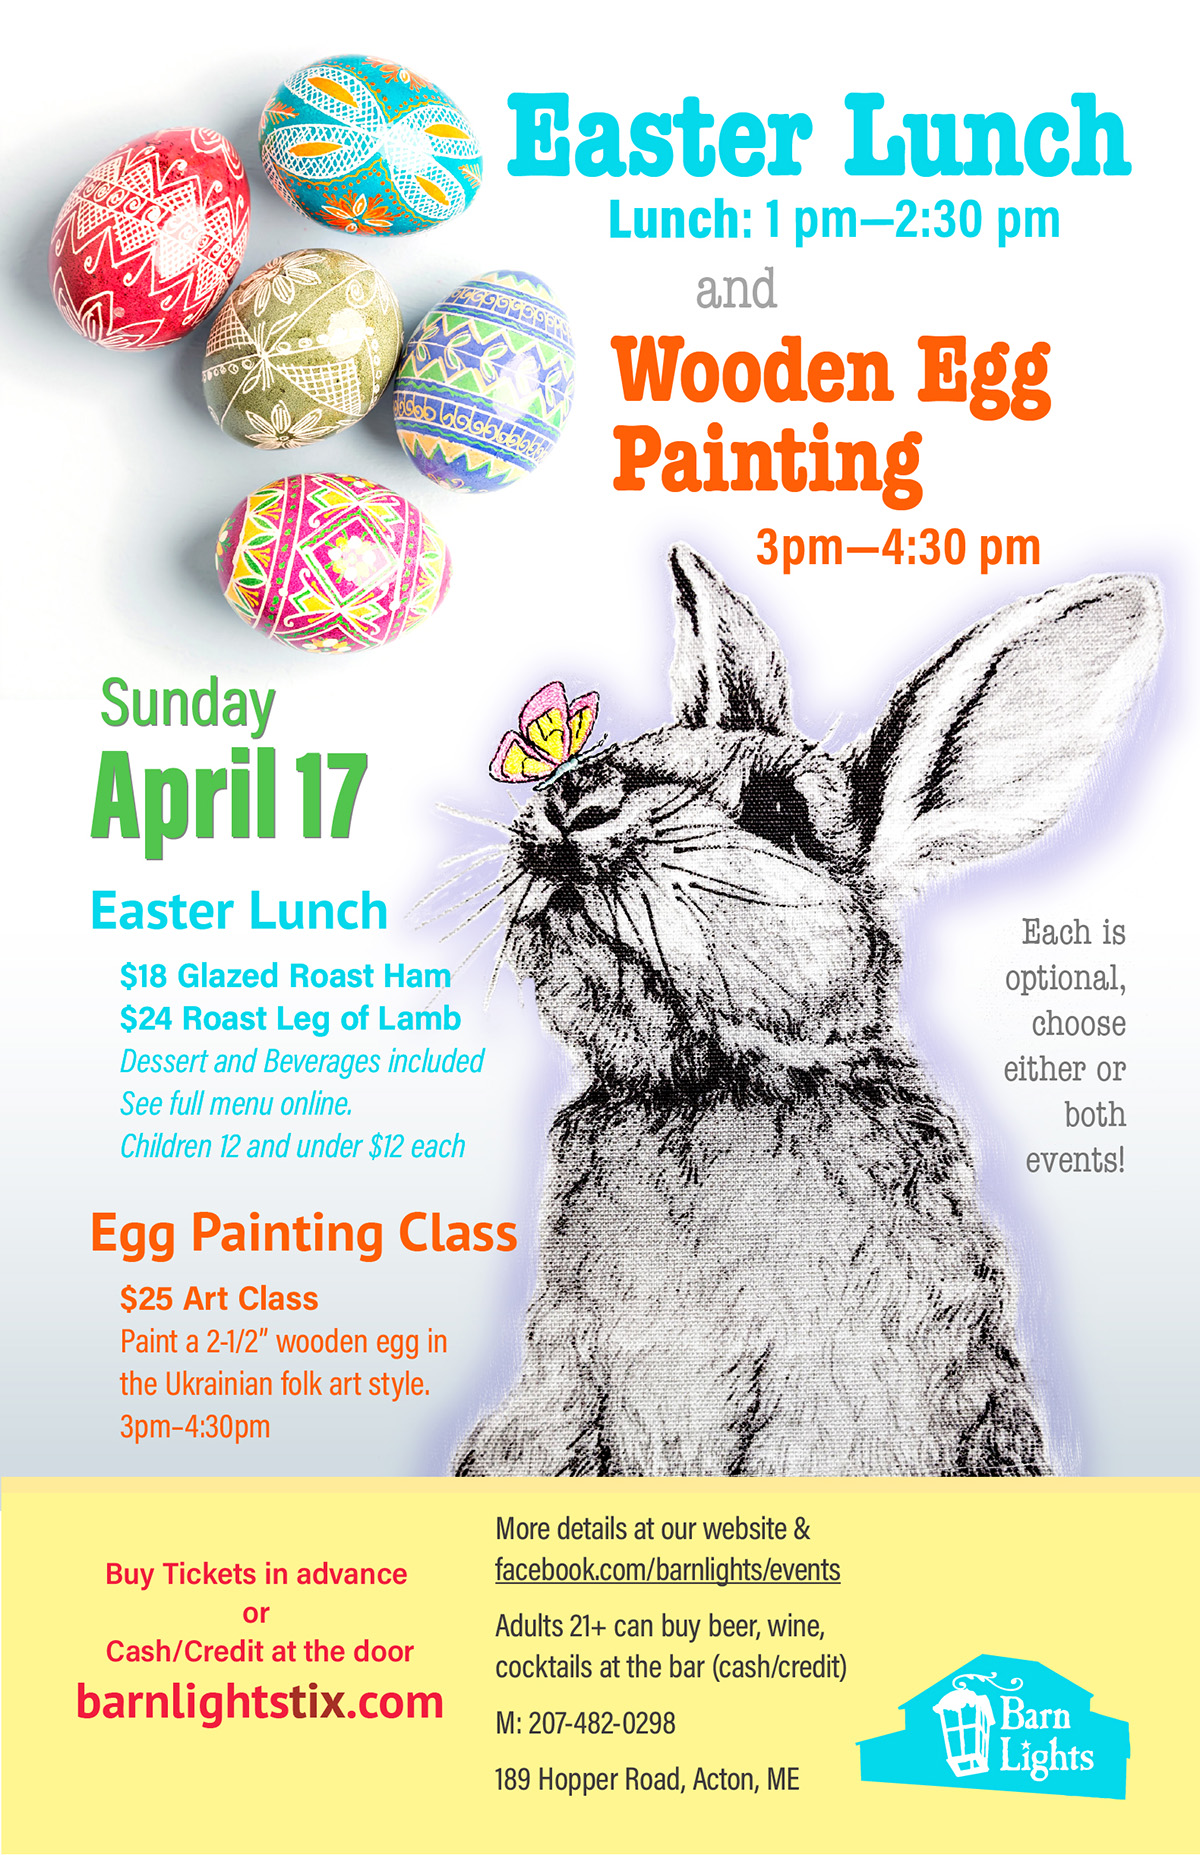 Easter Lunch and wooden egg painting at Barn Lights